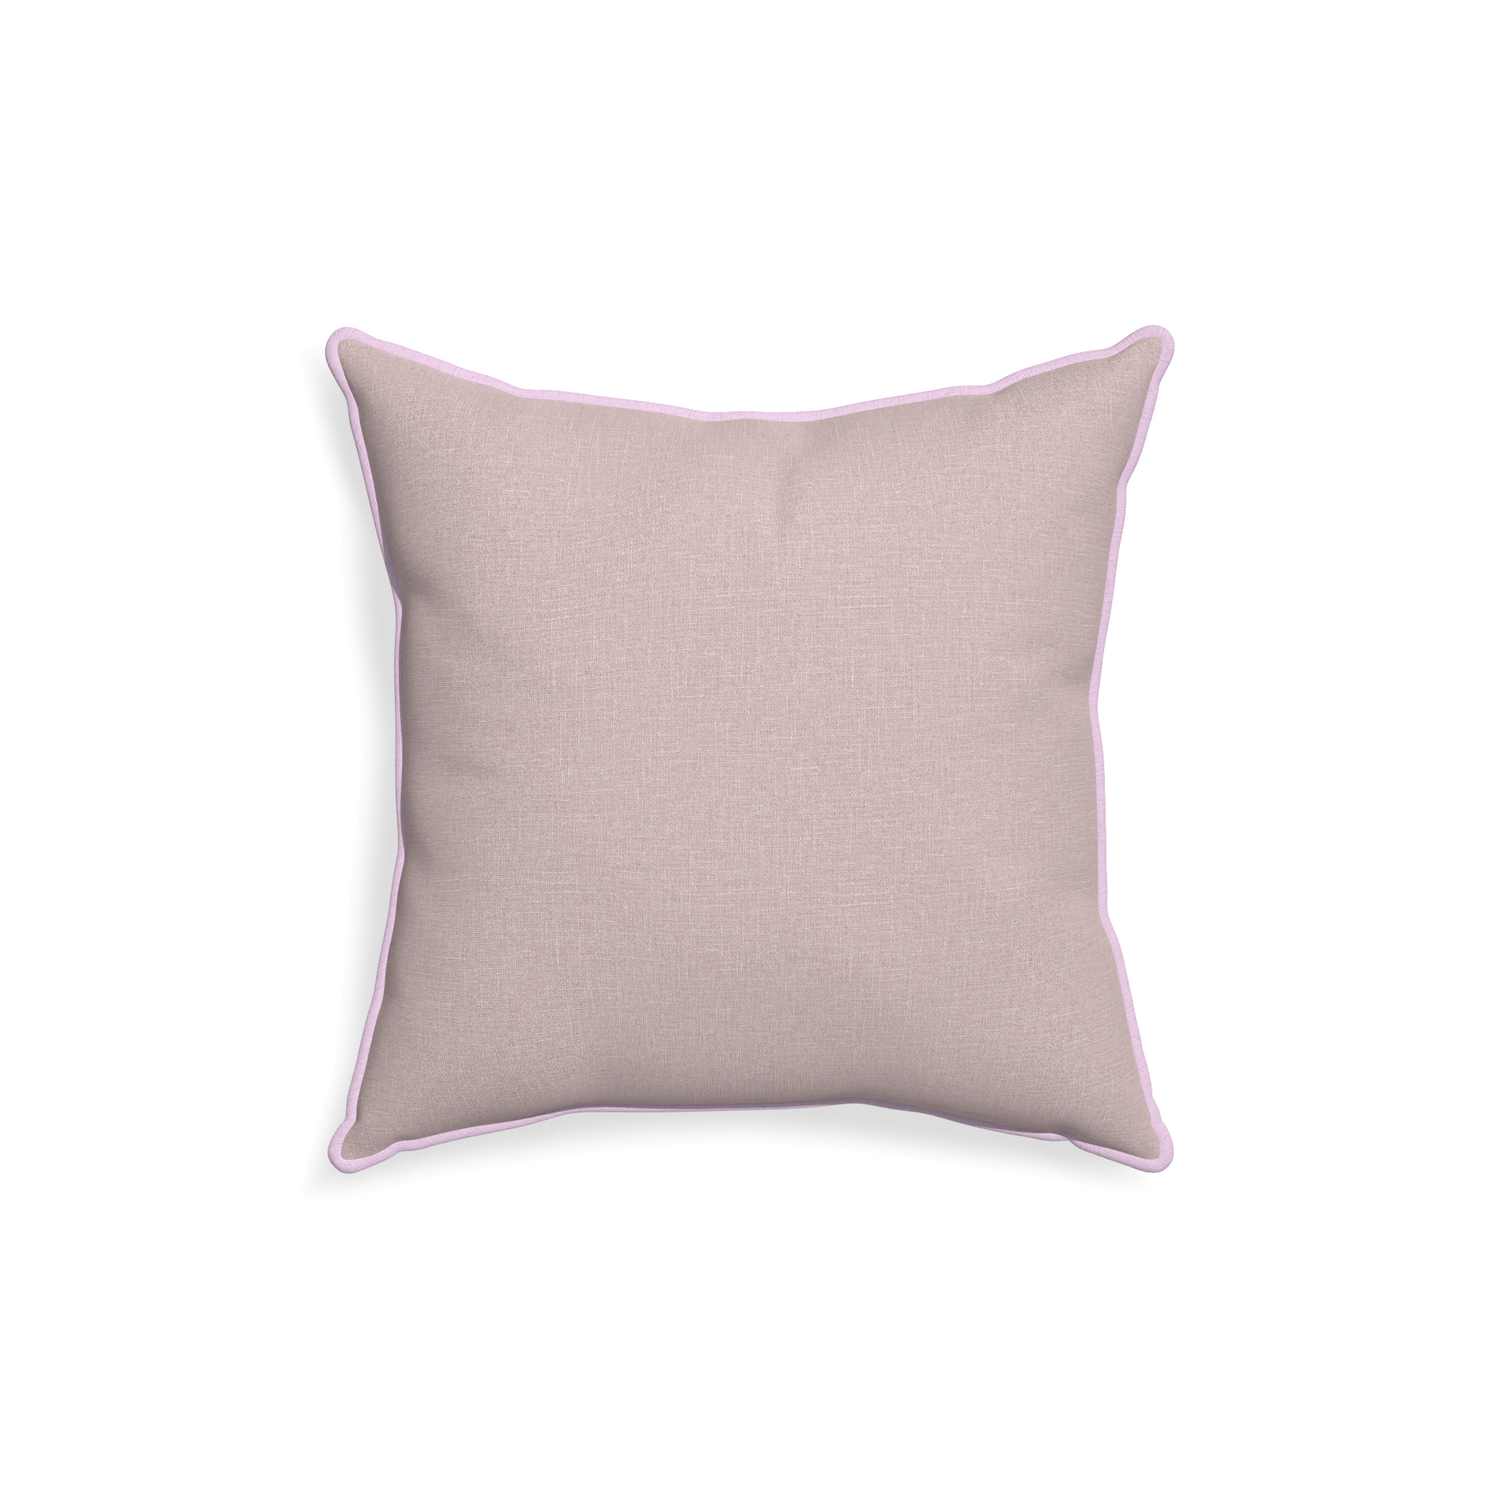 18-square orchid custom mauve pinkpillow with l piping on white background